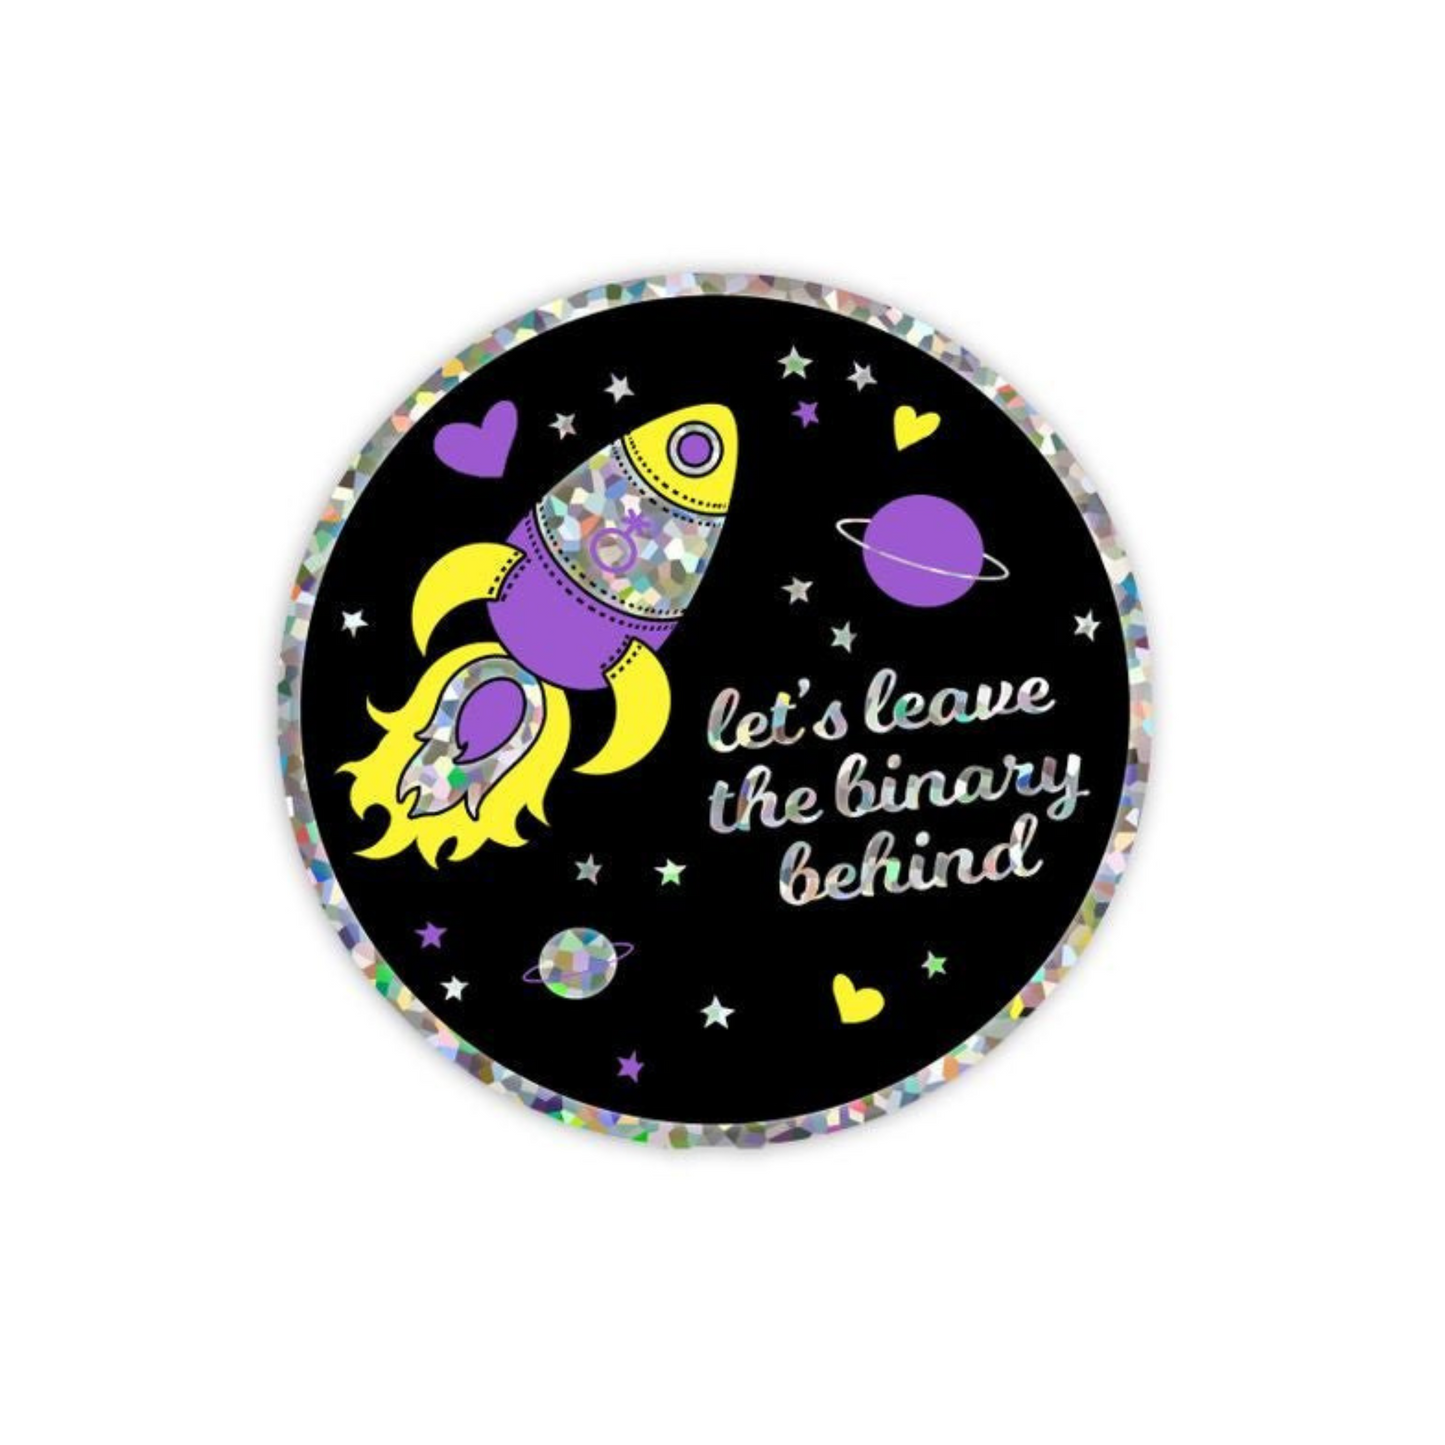 Let's Leave the Binary - Nonbinary Queer Holographic Glitter LGBT Sticker